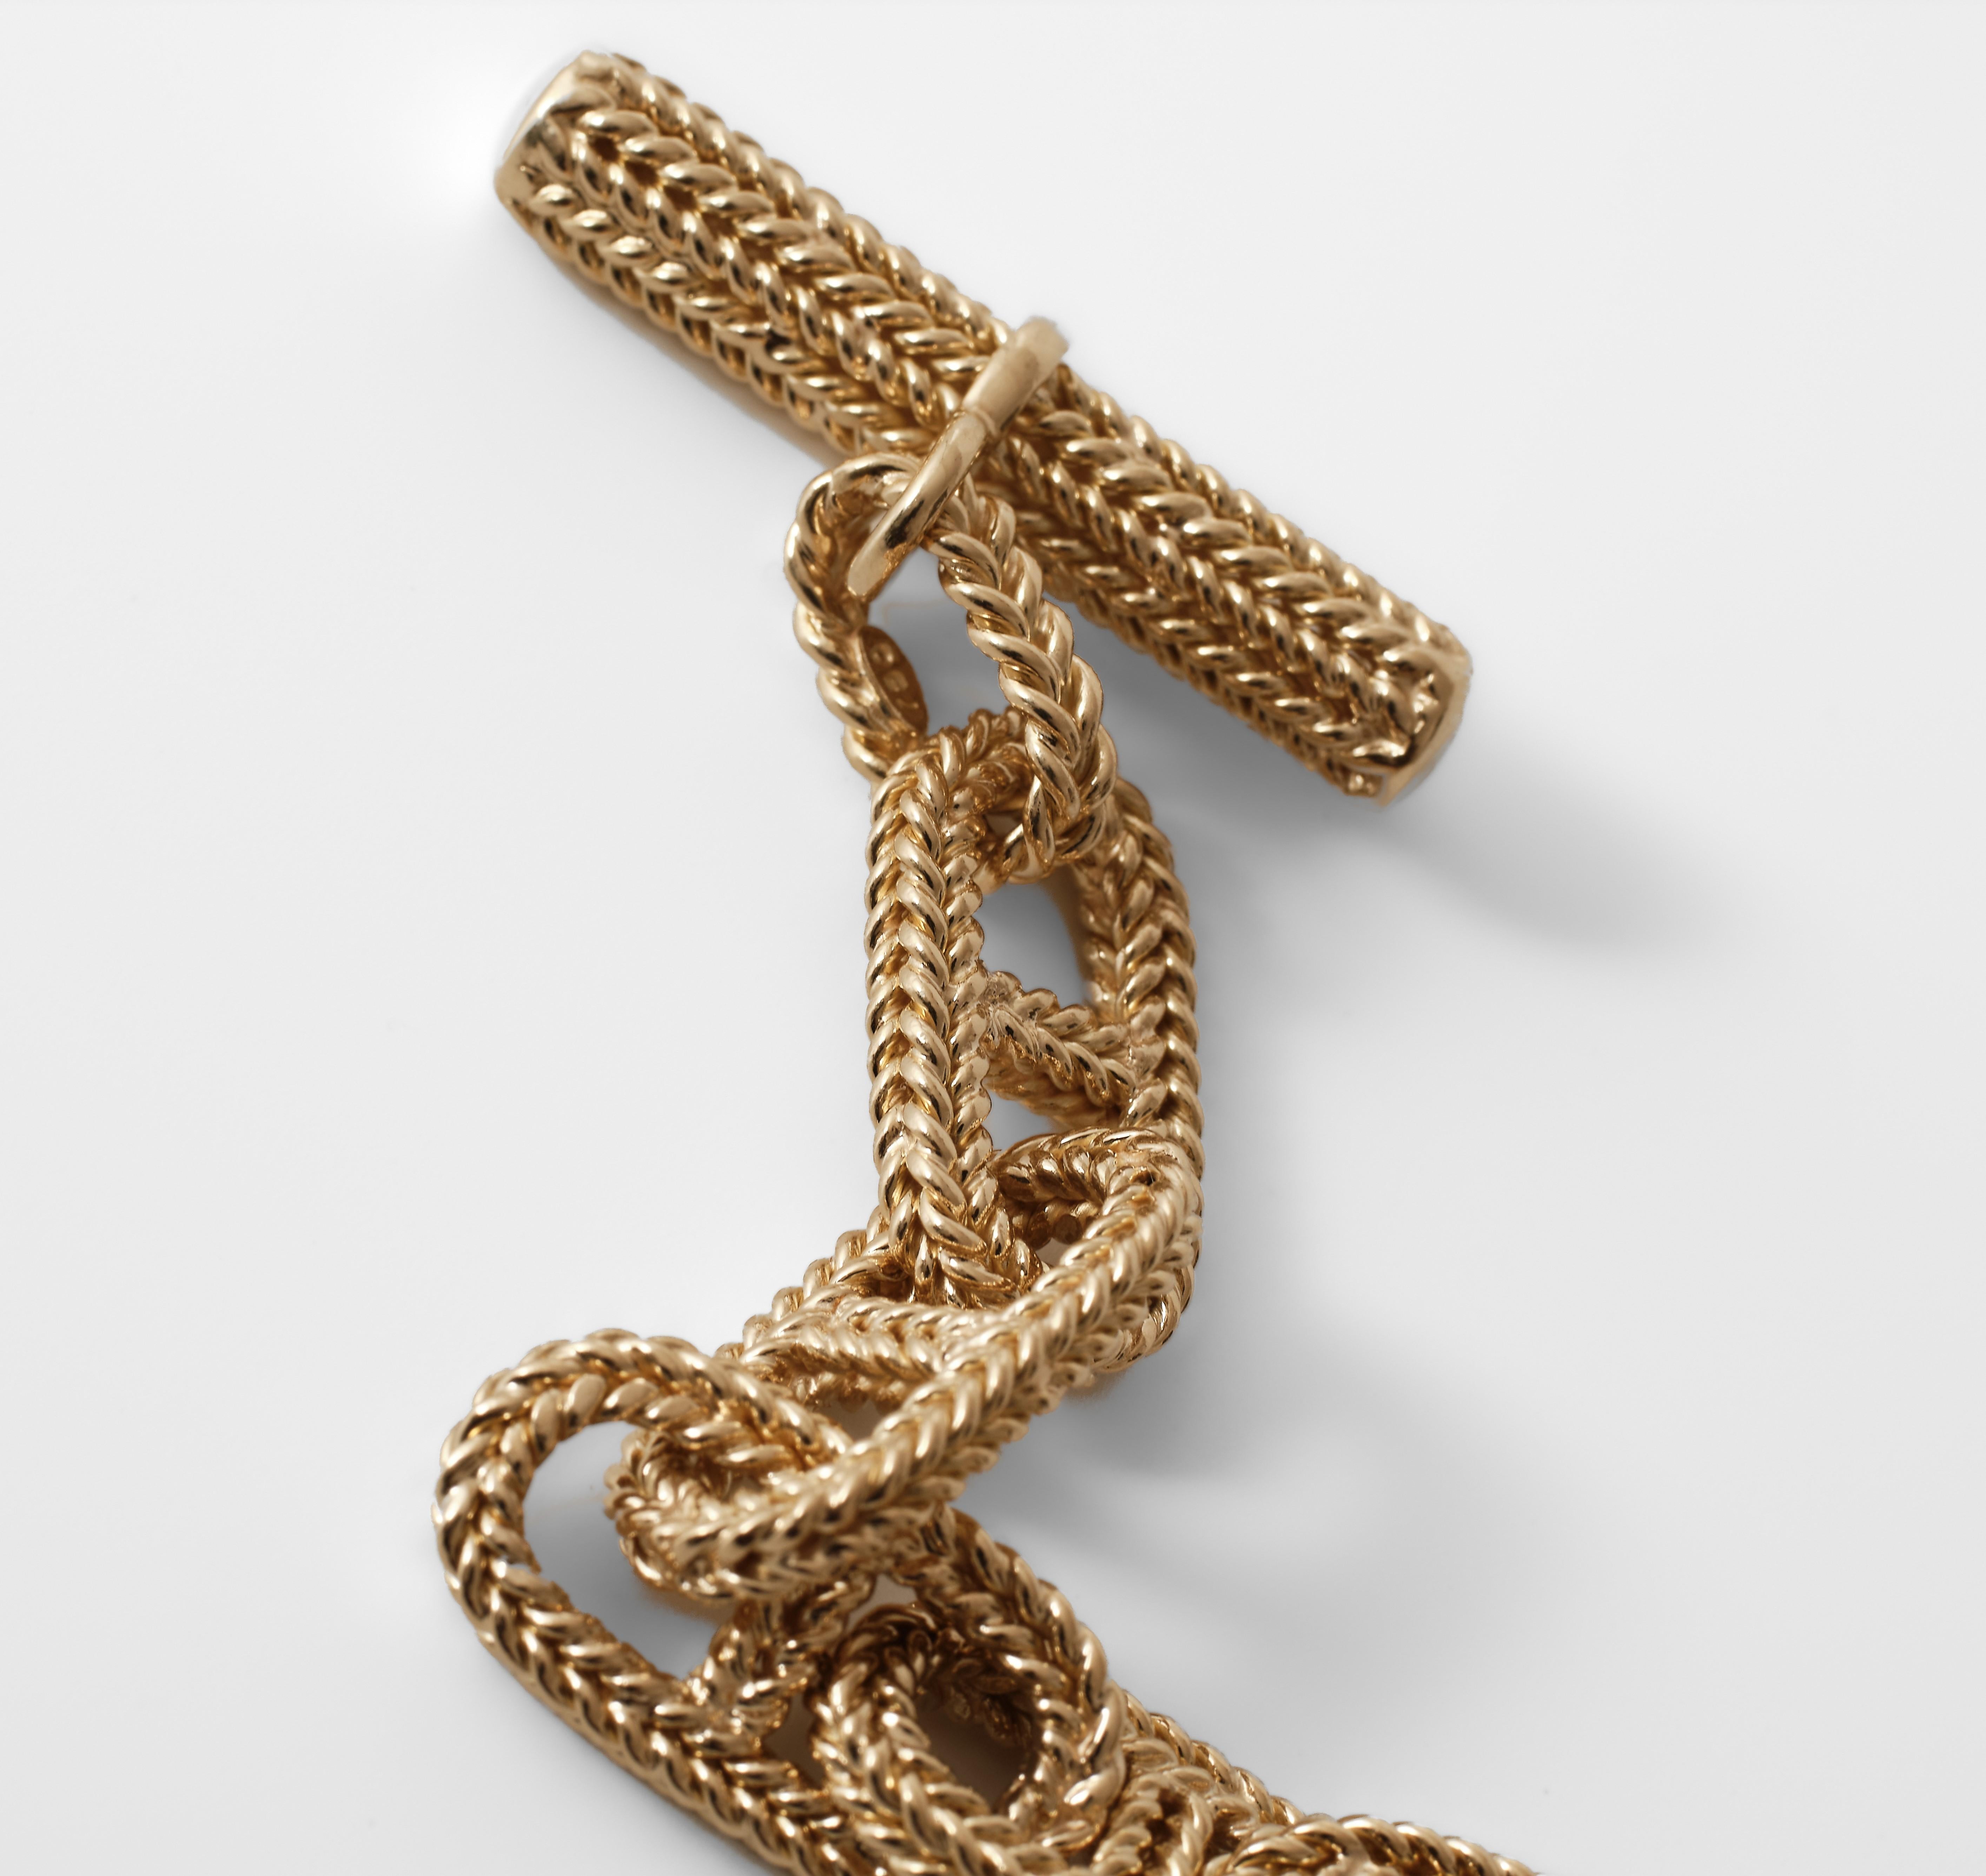 Modern Chaine d’Ancre bracelet with toggle clasp, 18 karat gold, circa 1950-60